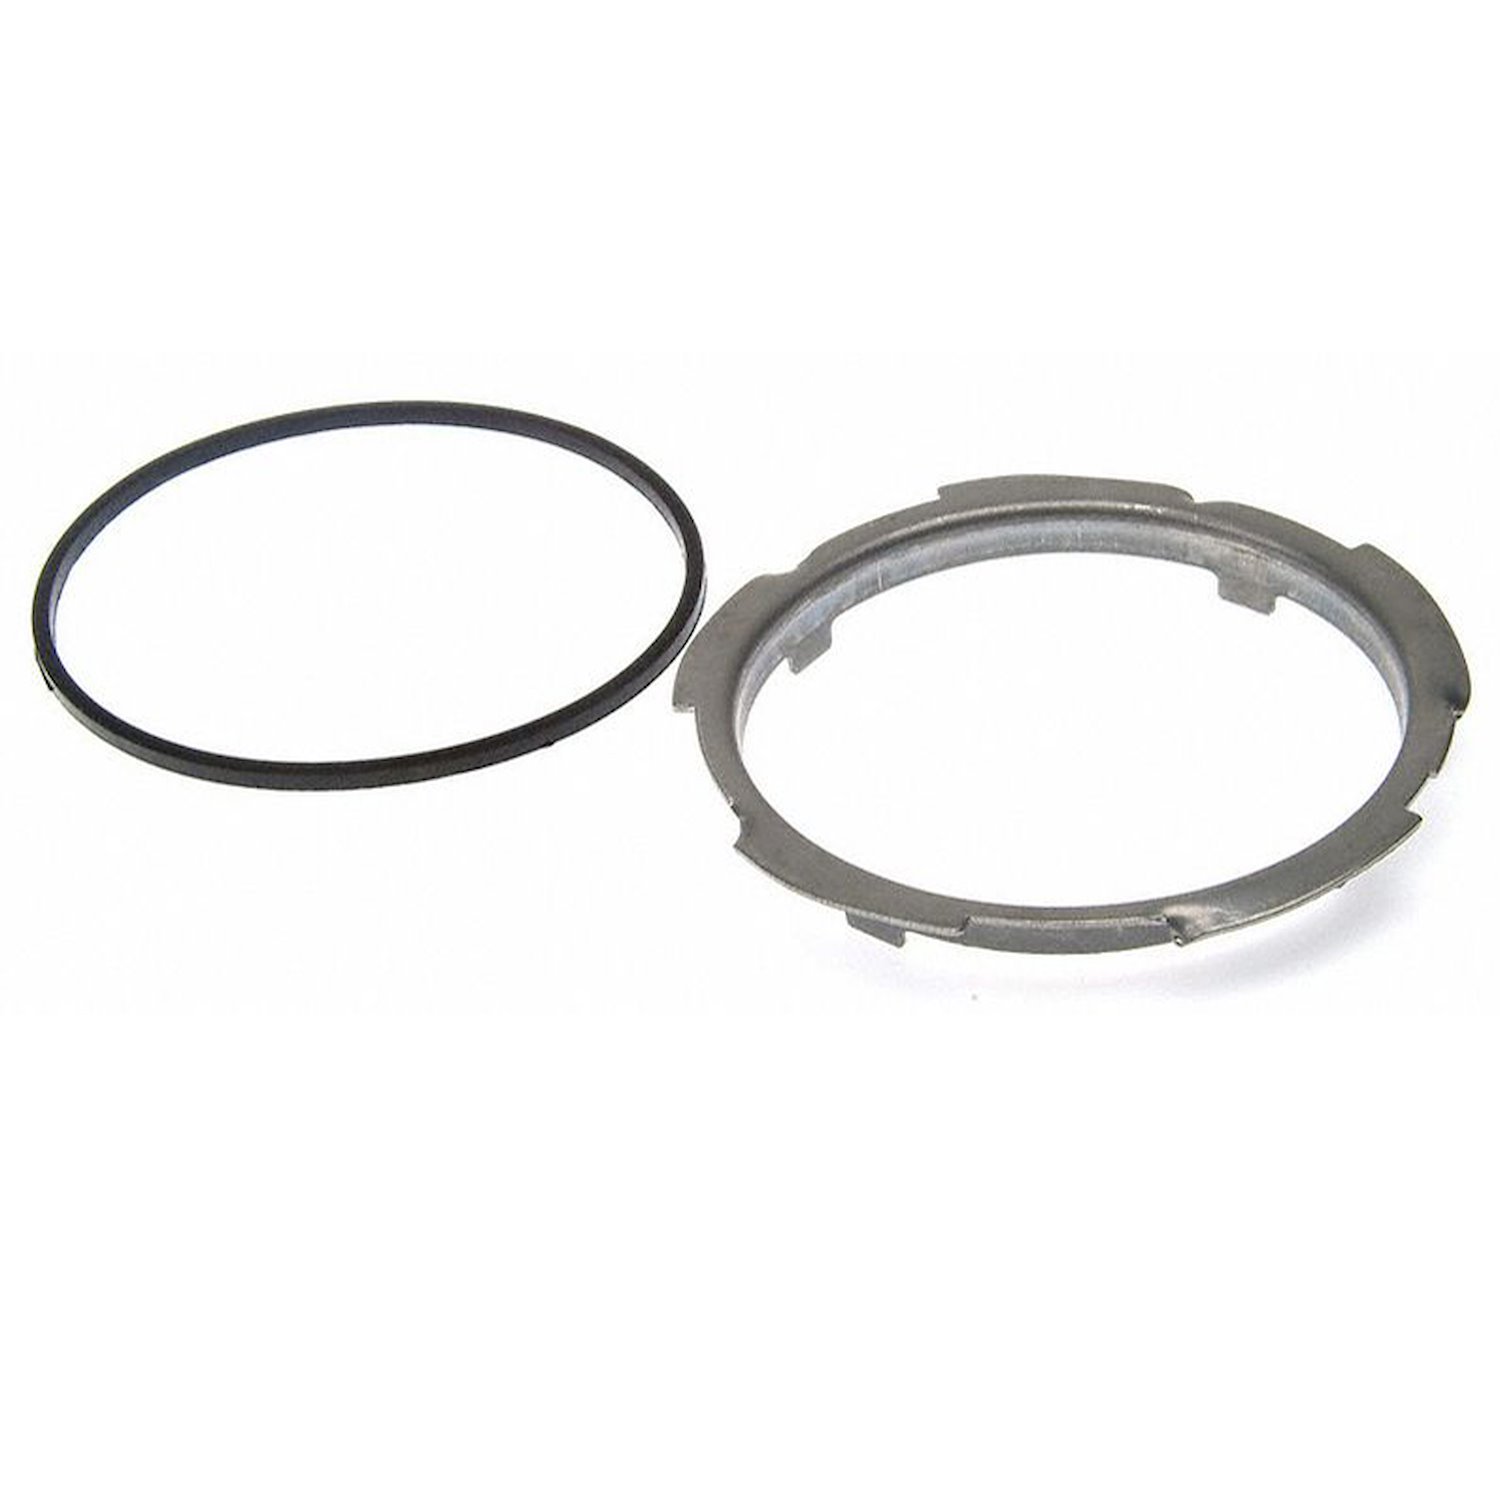 Fuel Tank Lock Ring for 1980-1995 Ford/Lincoln/Mercury